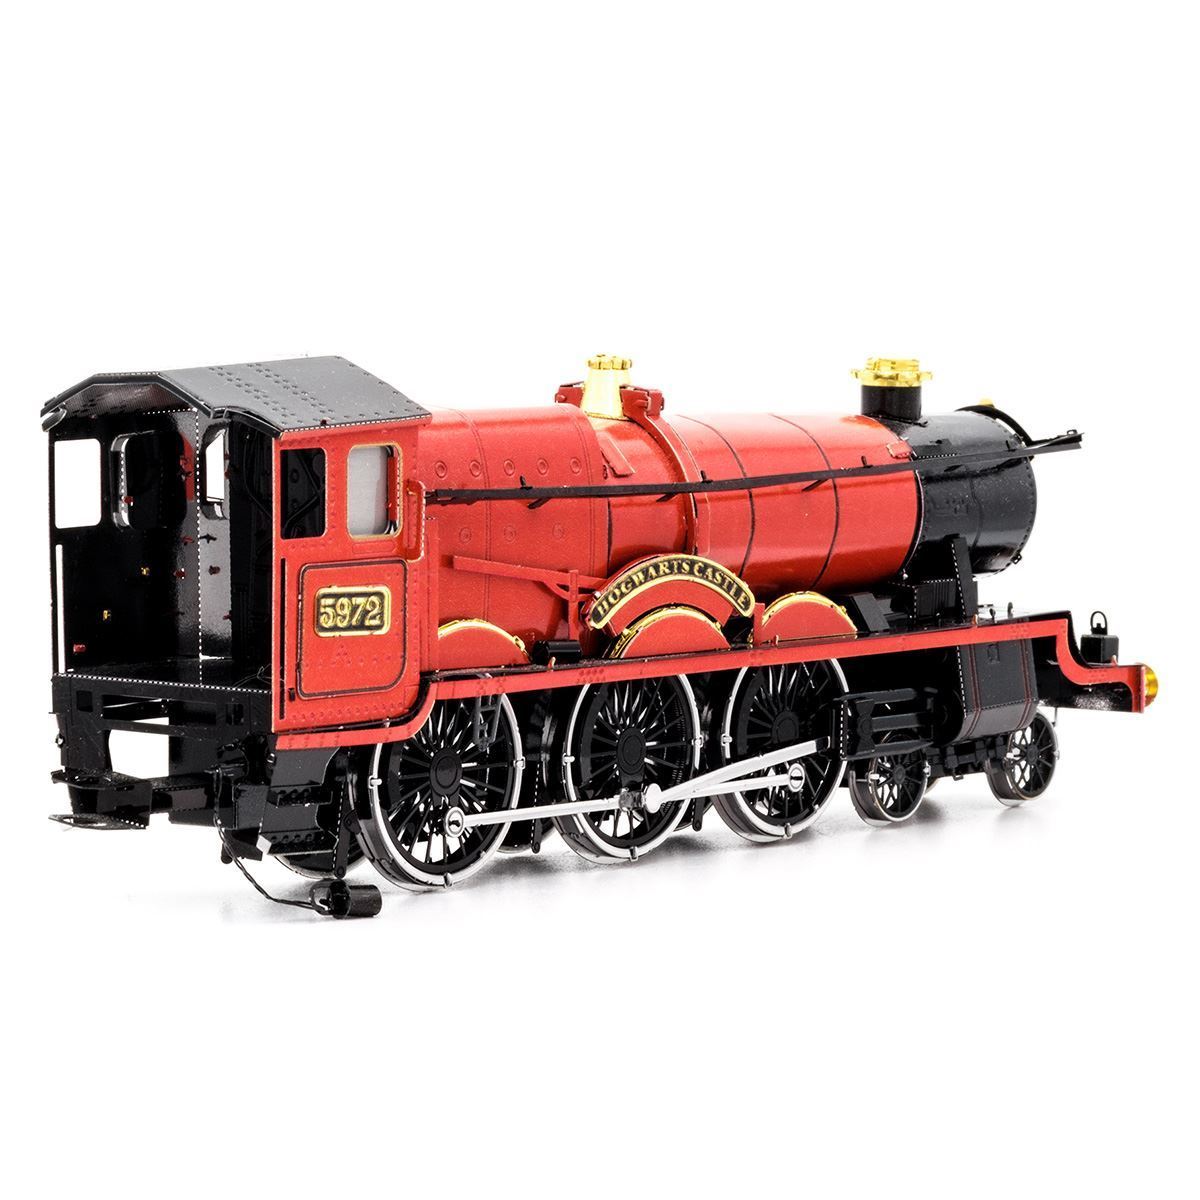 METAL EARTH ICONX Harry Potter - Hogwarts Express